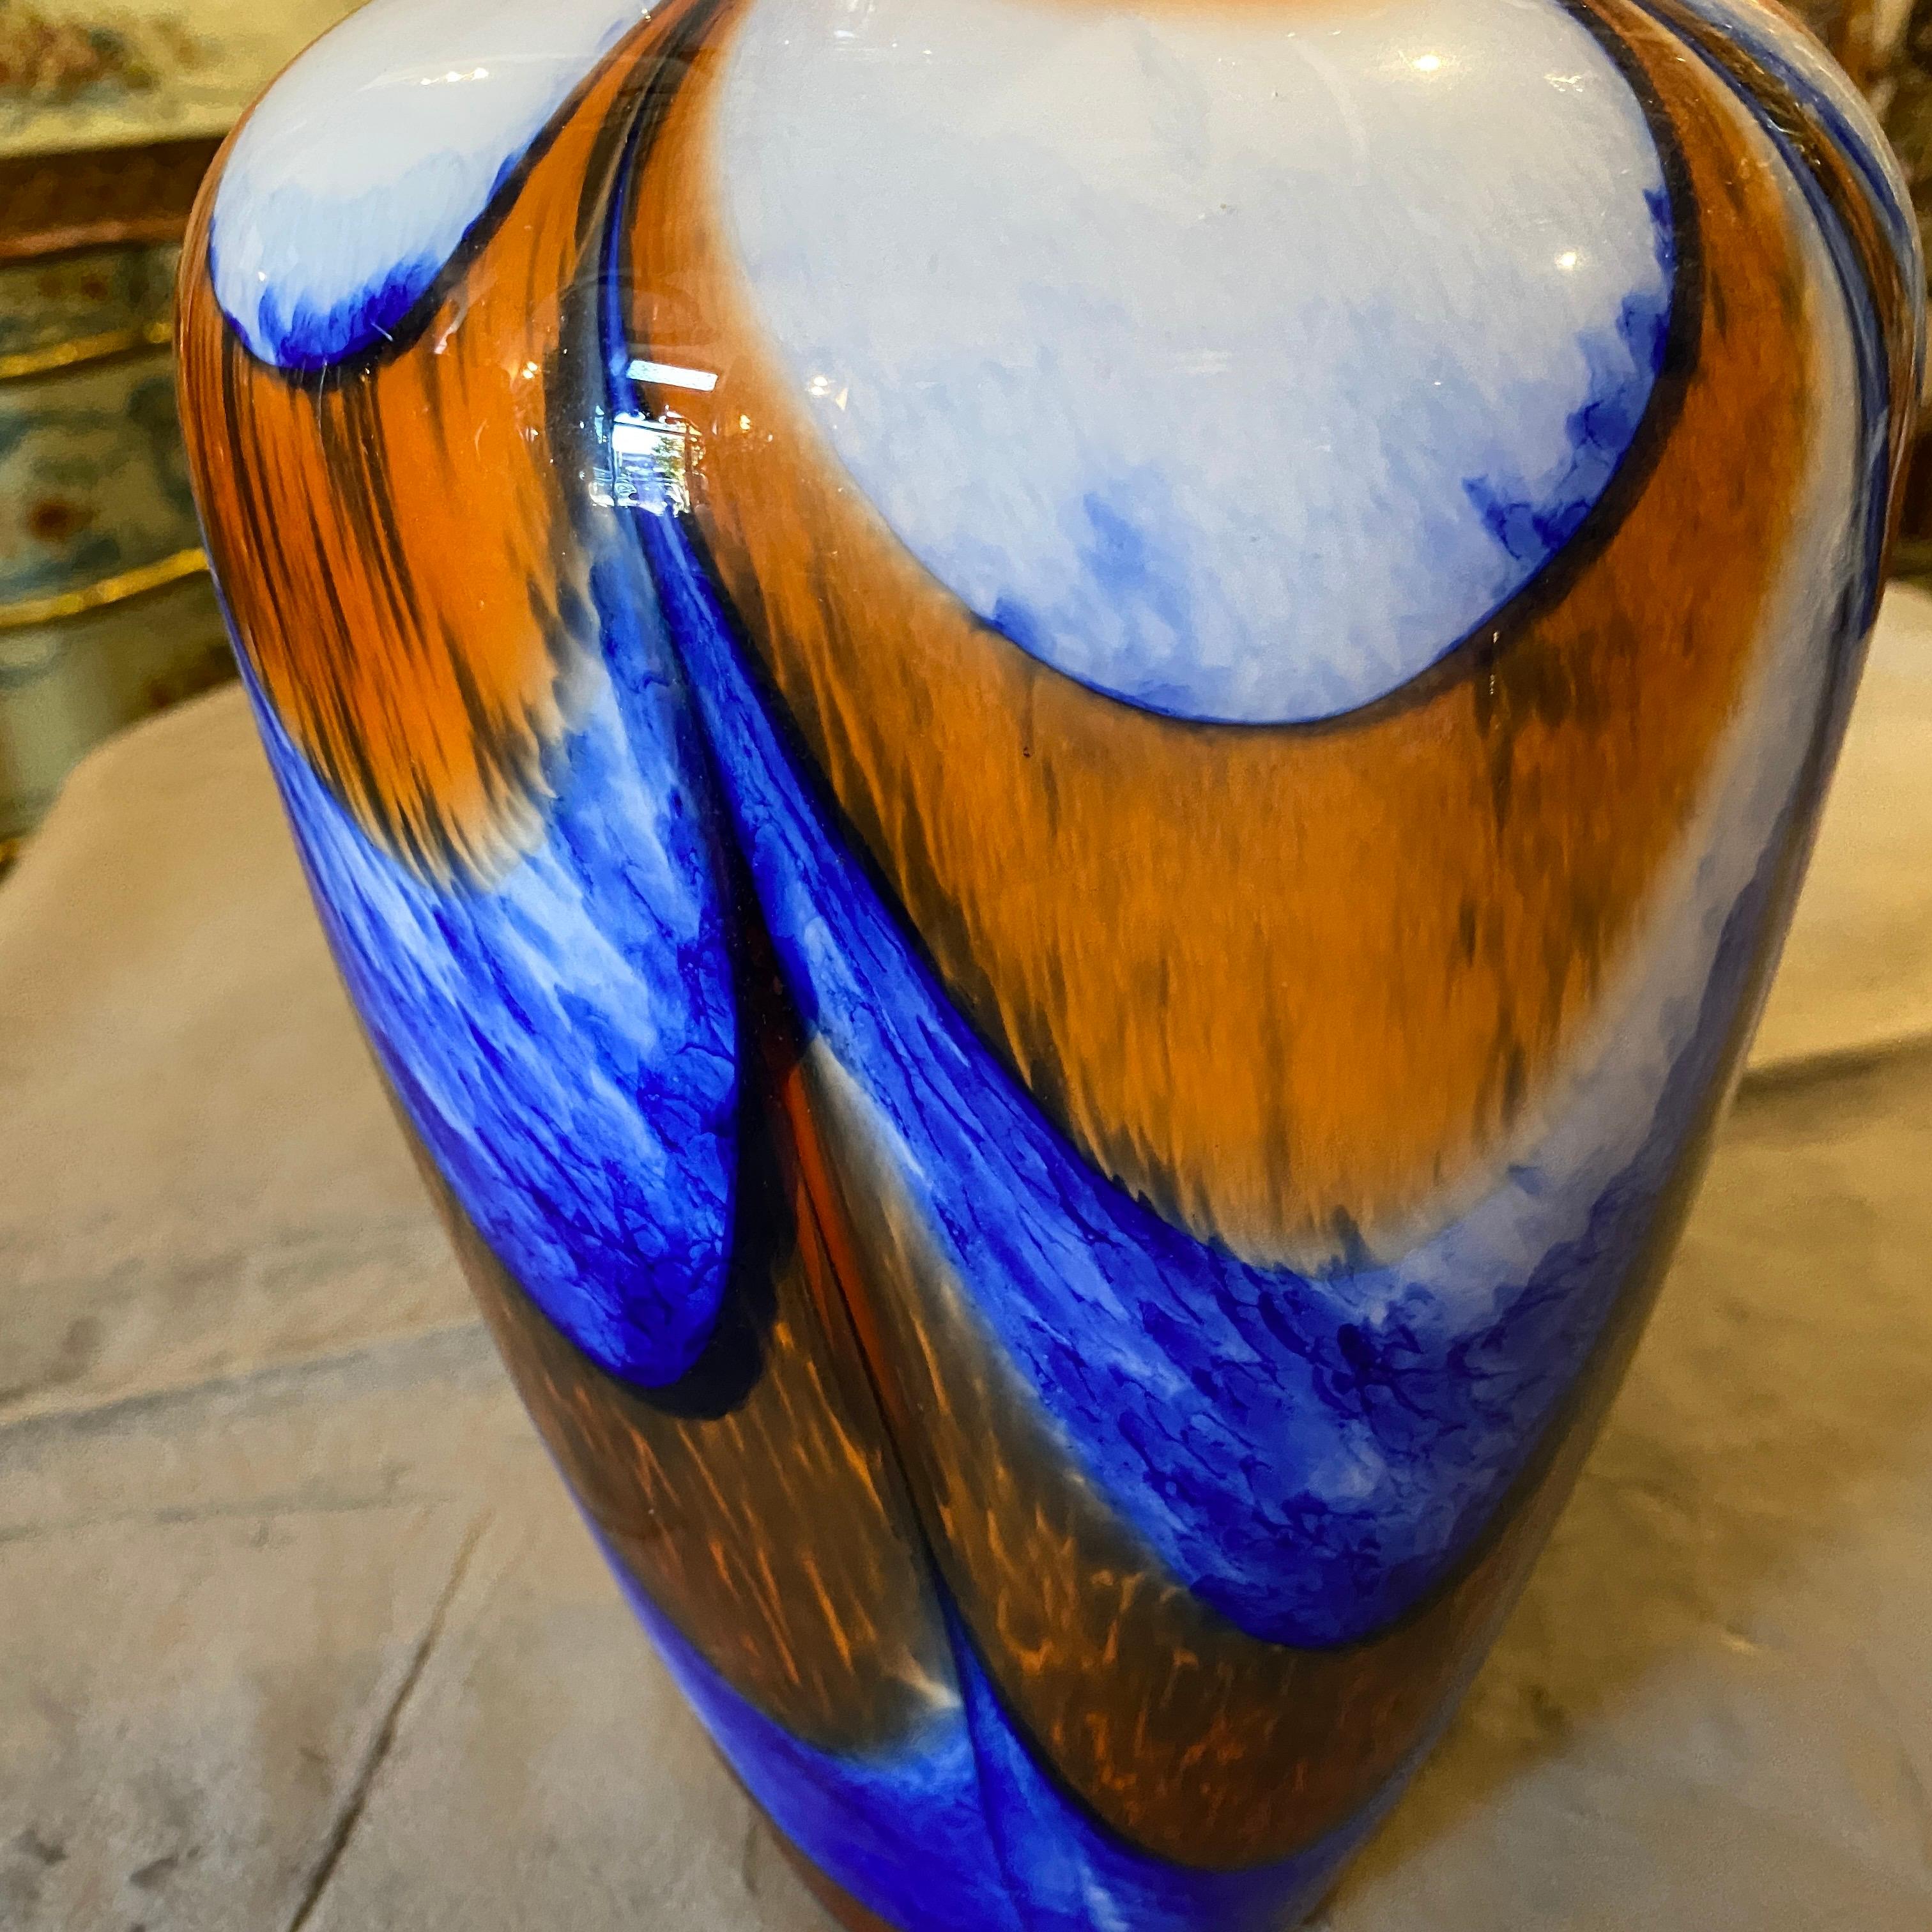 A stylish vase made in Italy in the Seventies by Carlo Moretti, vase it's in perfect conditions. This Vase is a stunning and vibrant example of Italian glass artistry from the iconic Murano glass-making region. Carlo Moretti, a renowned glassmaker,